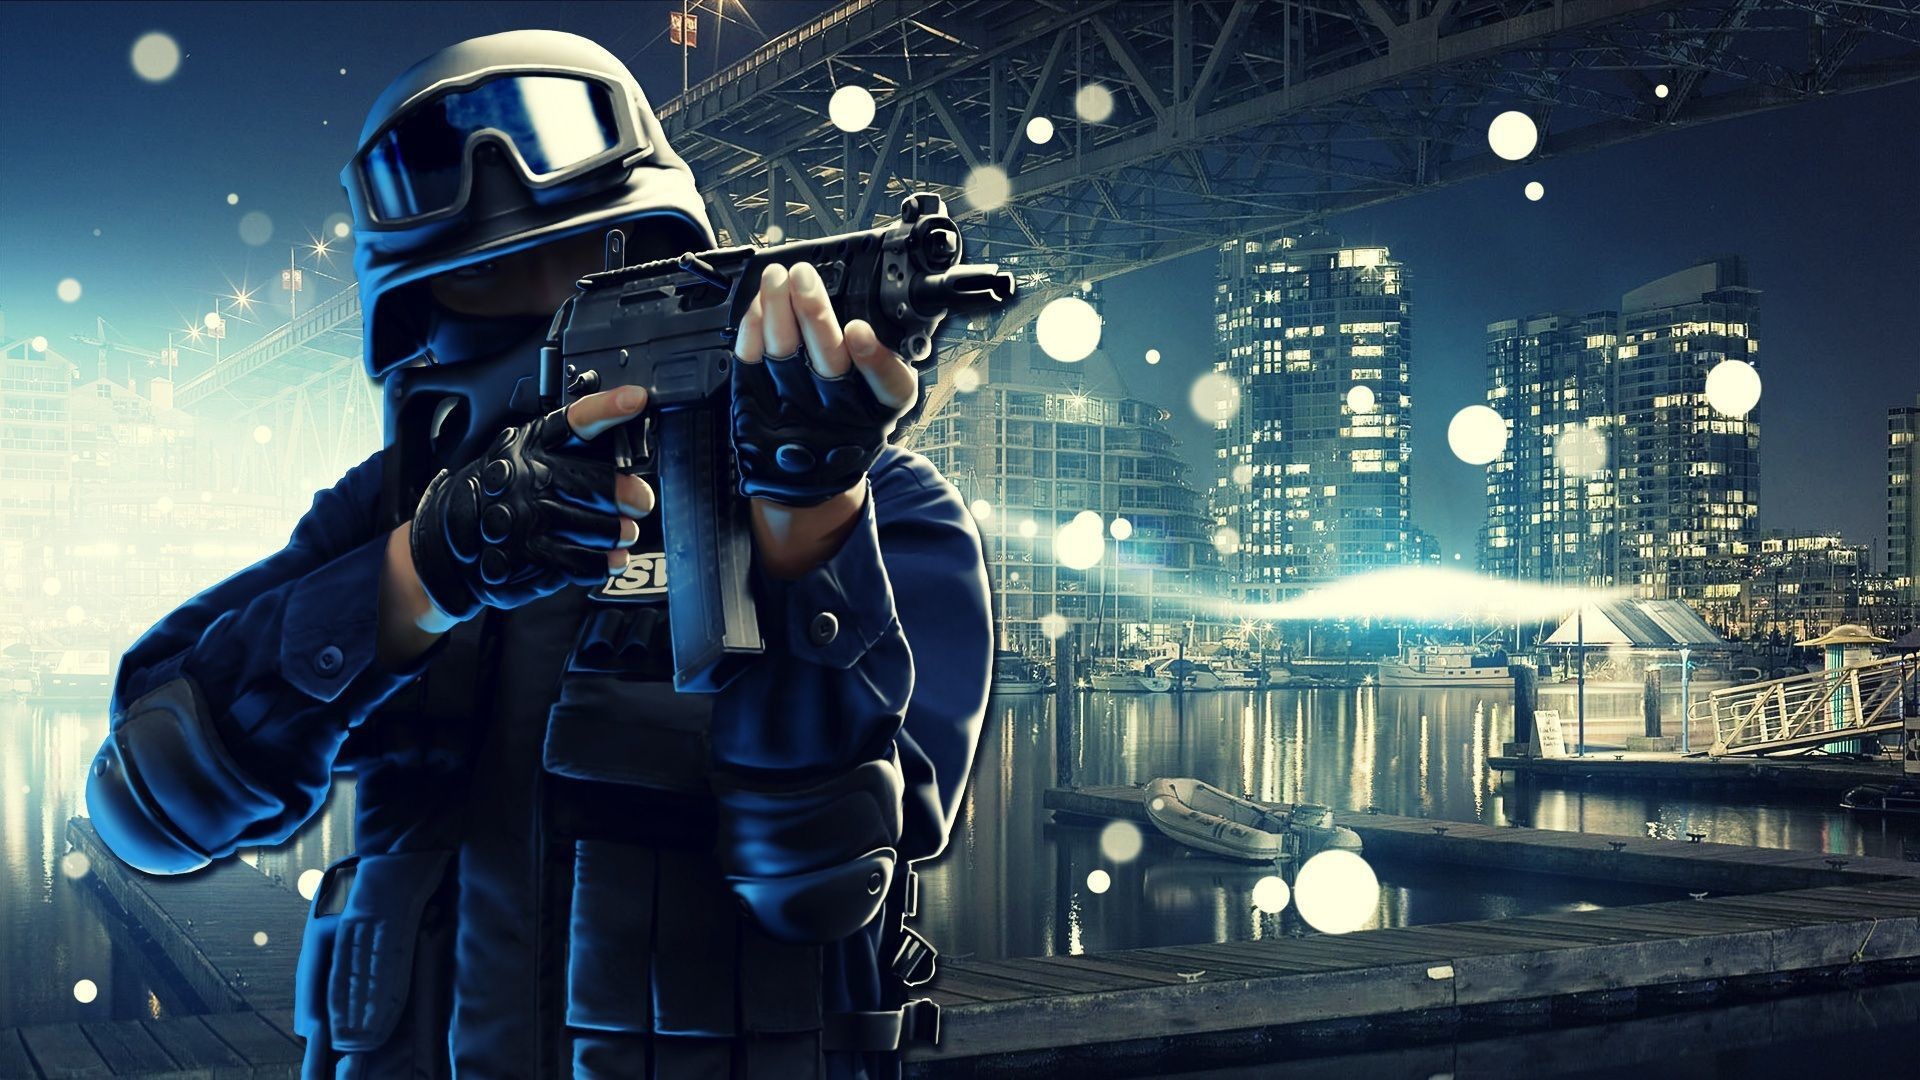 1920x1080 Swat Army Point Blank Online Game Wallpaper HD Image Picture Widescreen For  Desktop